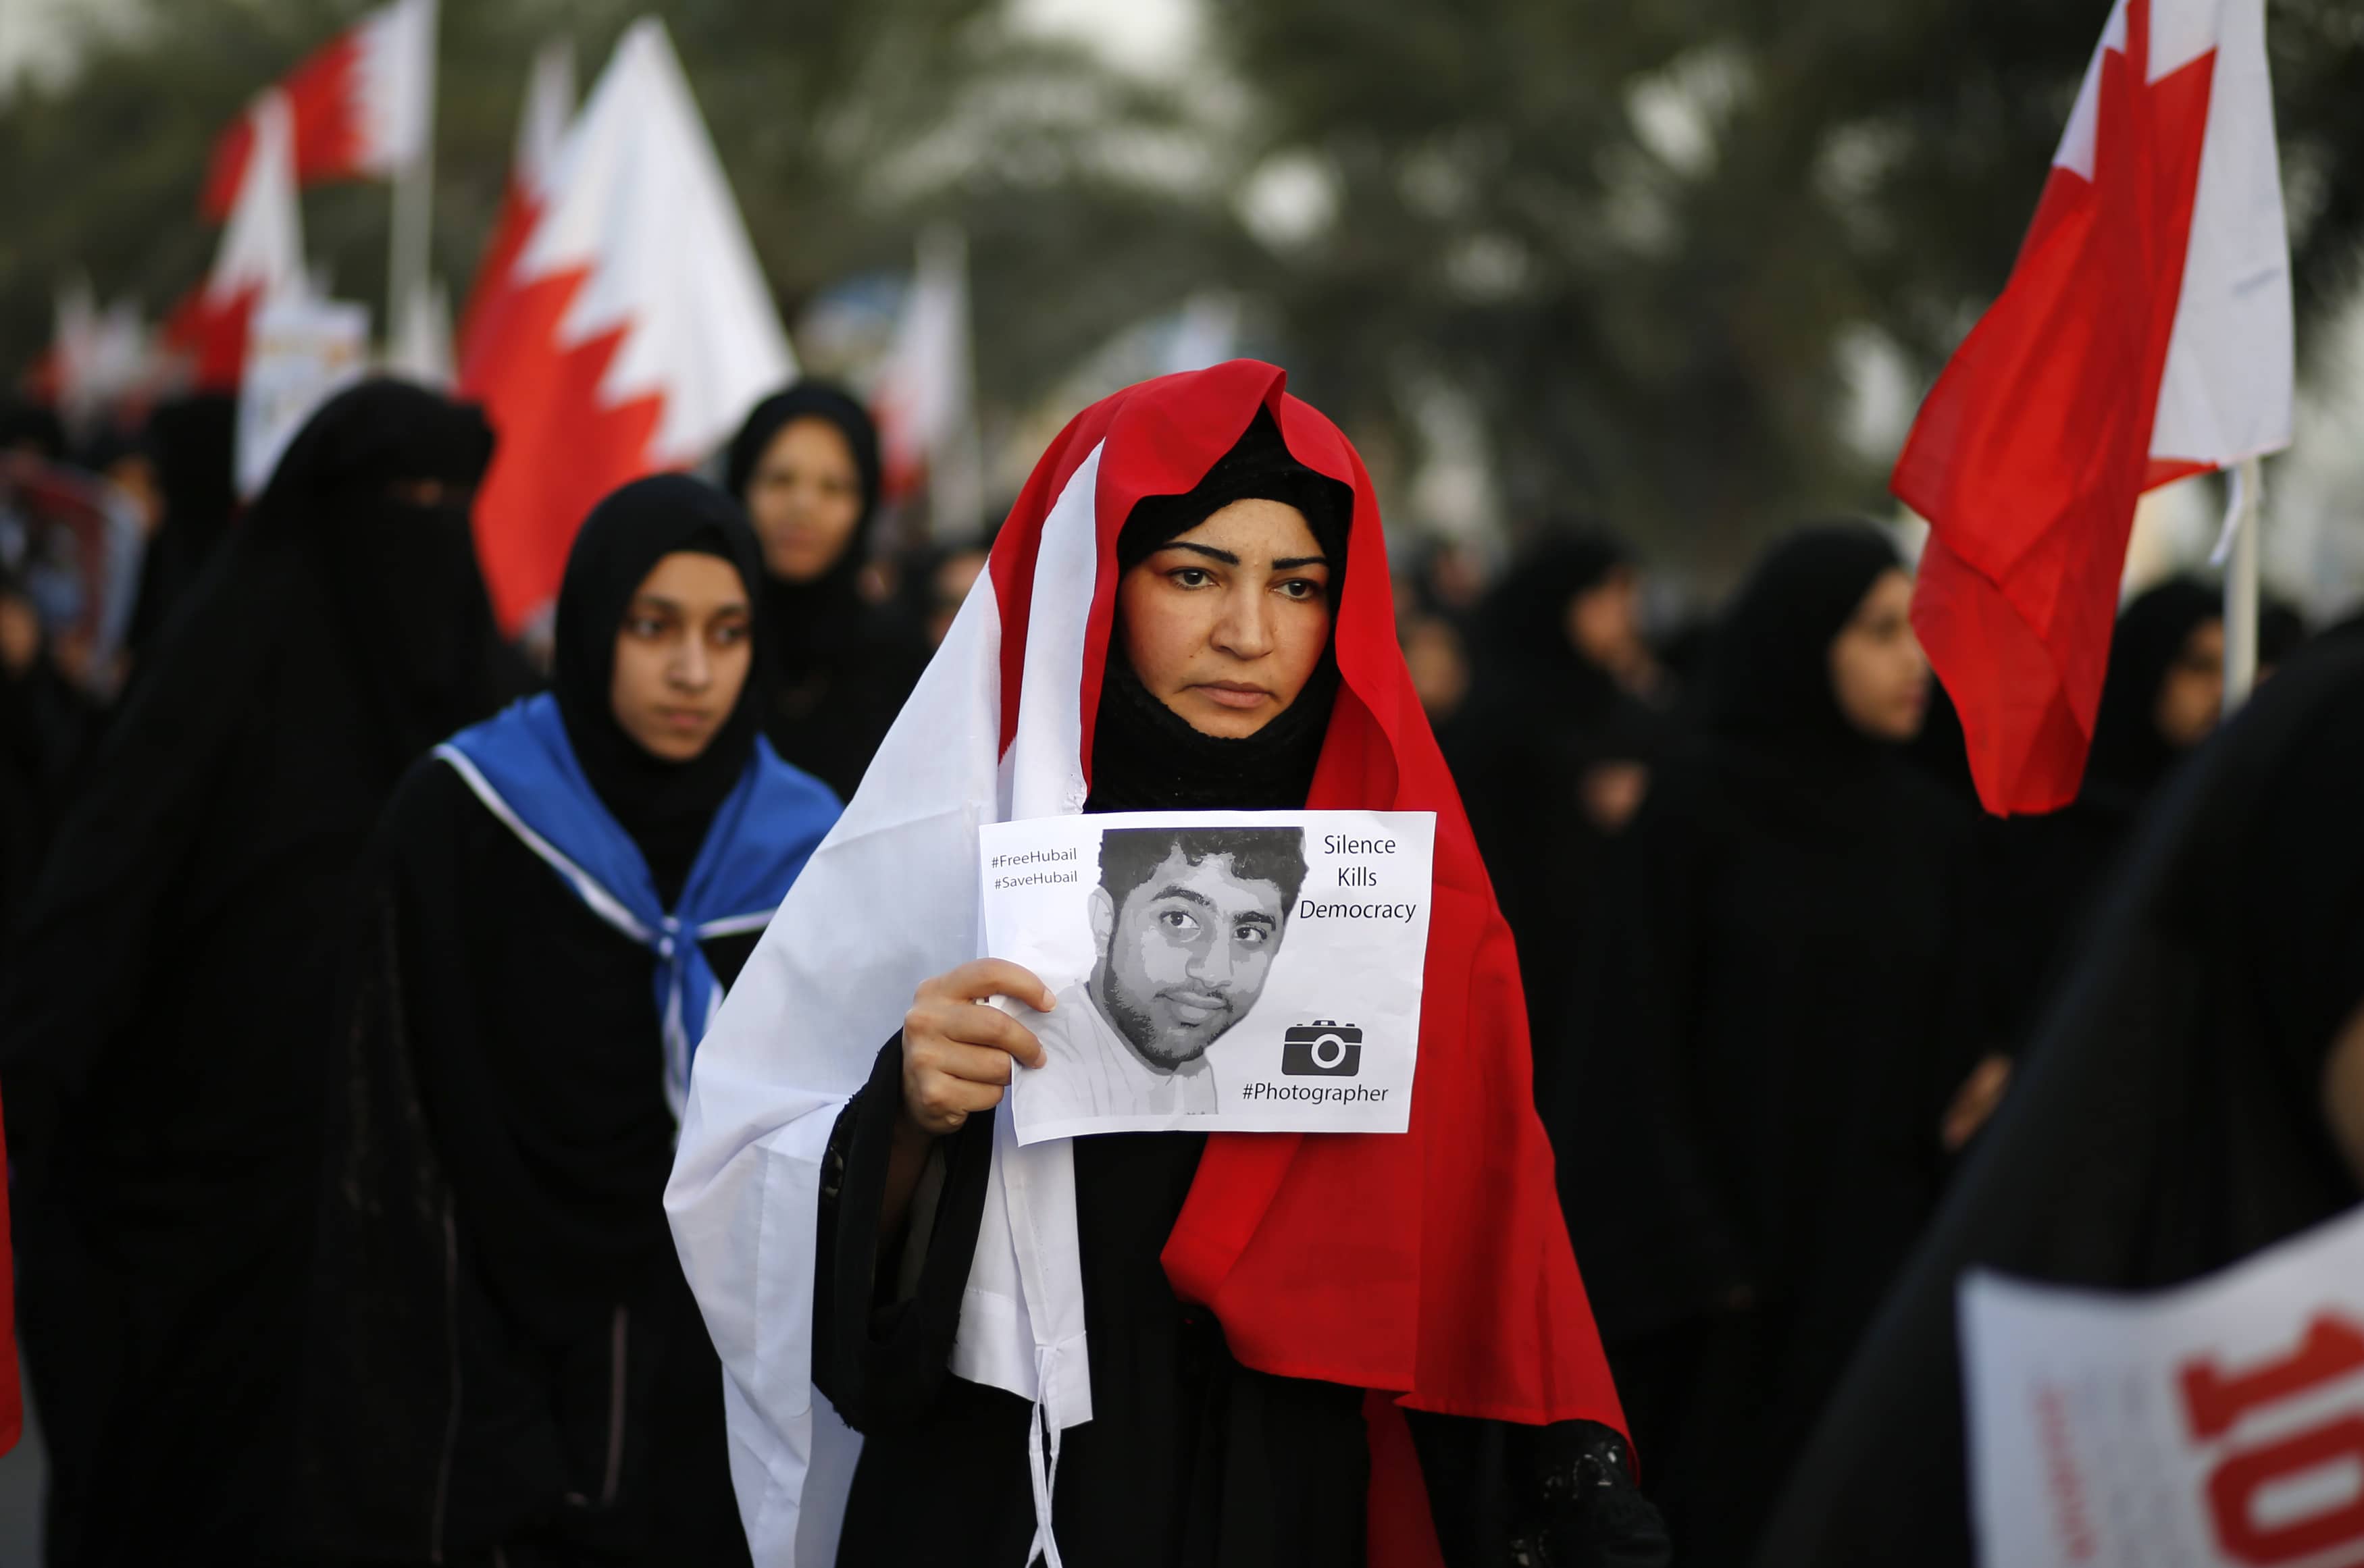 A protester holds a poster of detained photographer Hussein Hubail during an anti-government rally in Budaiya, west of Manama on 13 December 2013, REUTERS/Hamad I Mohammed